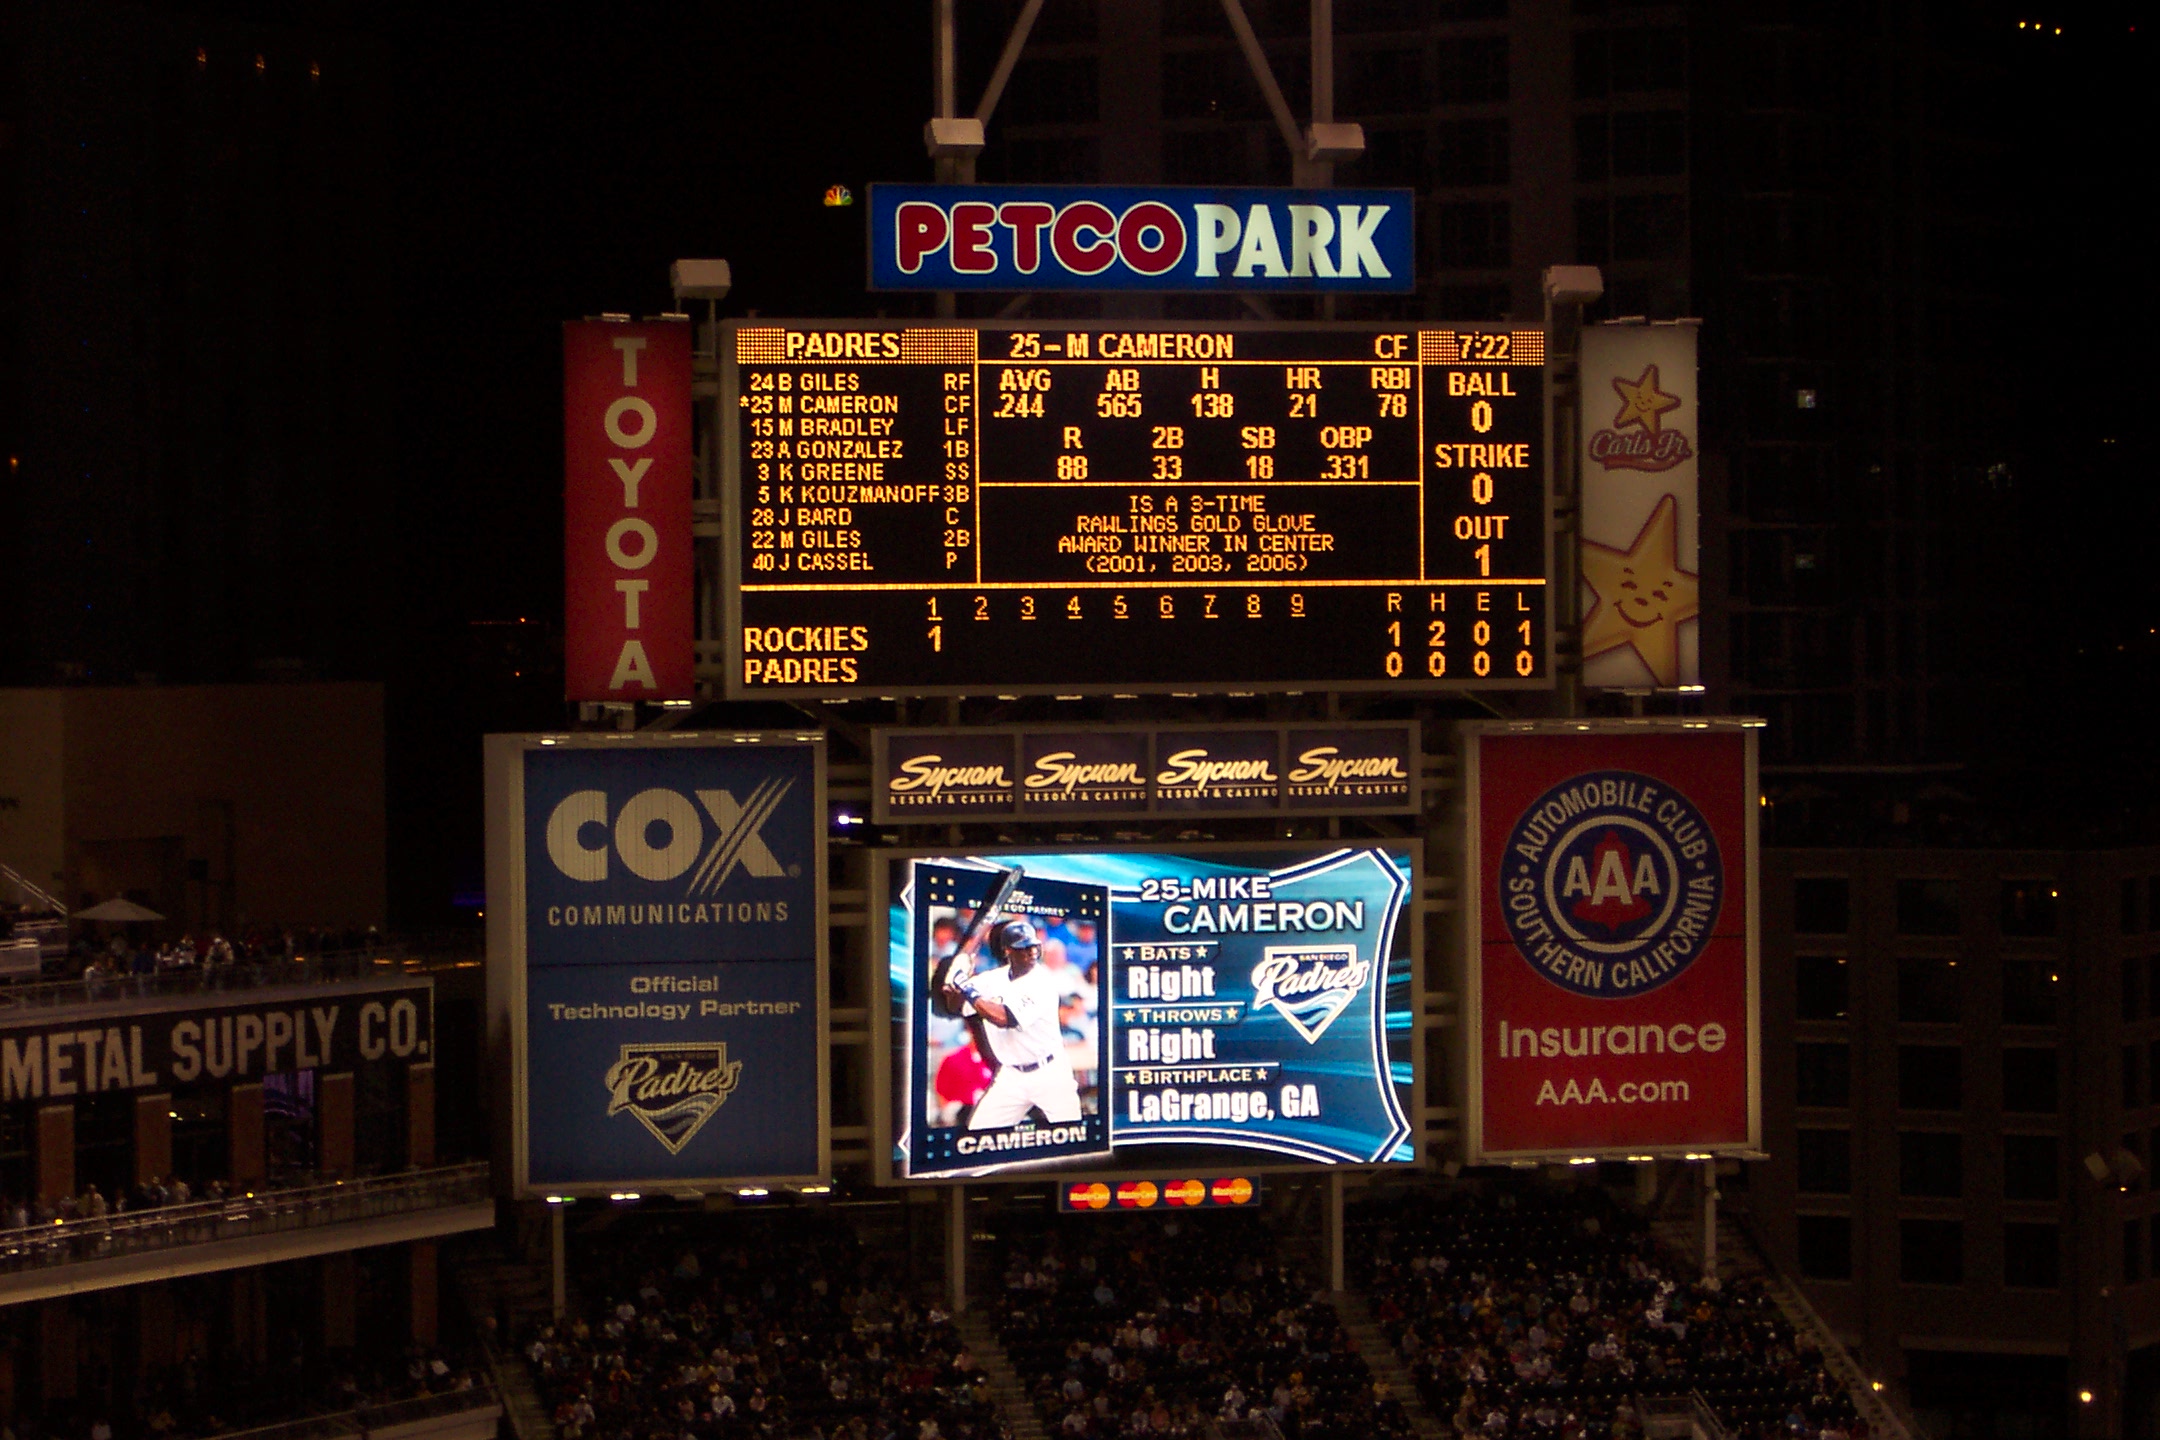 the scoreboard for petco park at night with its numbers and time